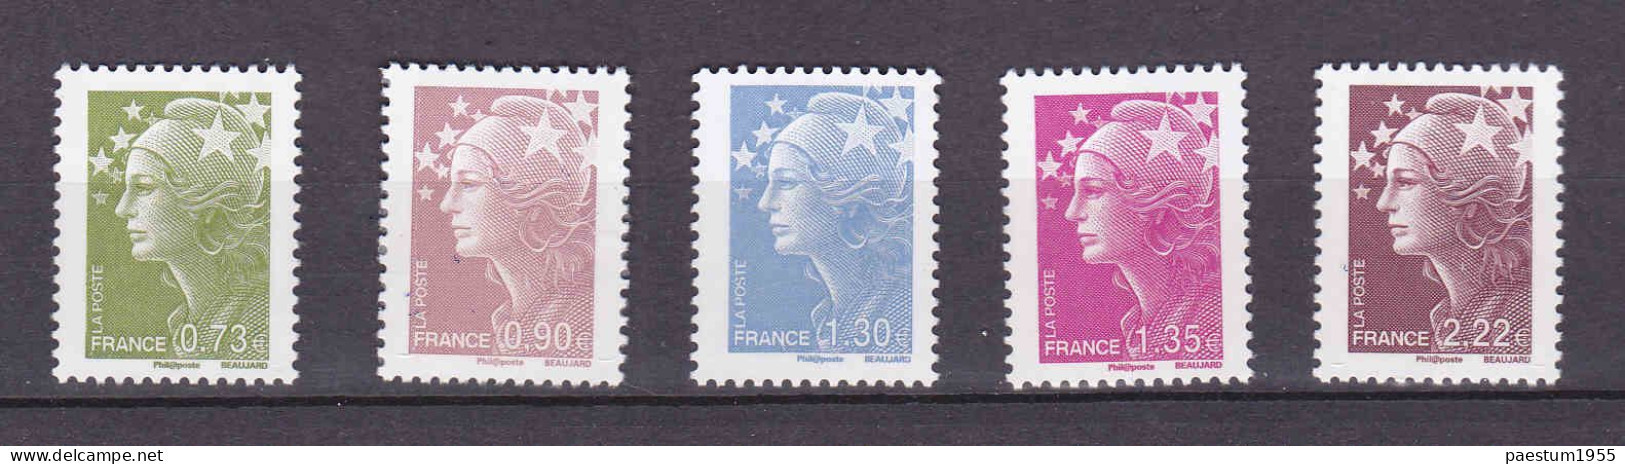 Série COMPLETE 5 Timbres Gommés Neuf** 2009 MNH Marianne De BEAUJARD Y&T 4342 à 4346 - 2008-2013 Marianne Of Beaujard